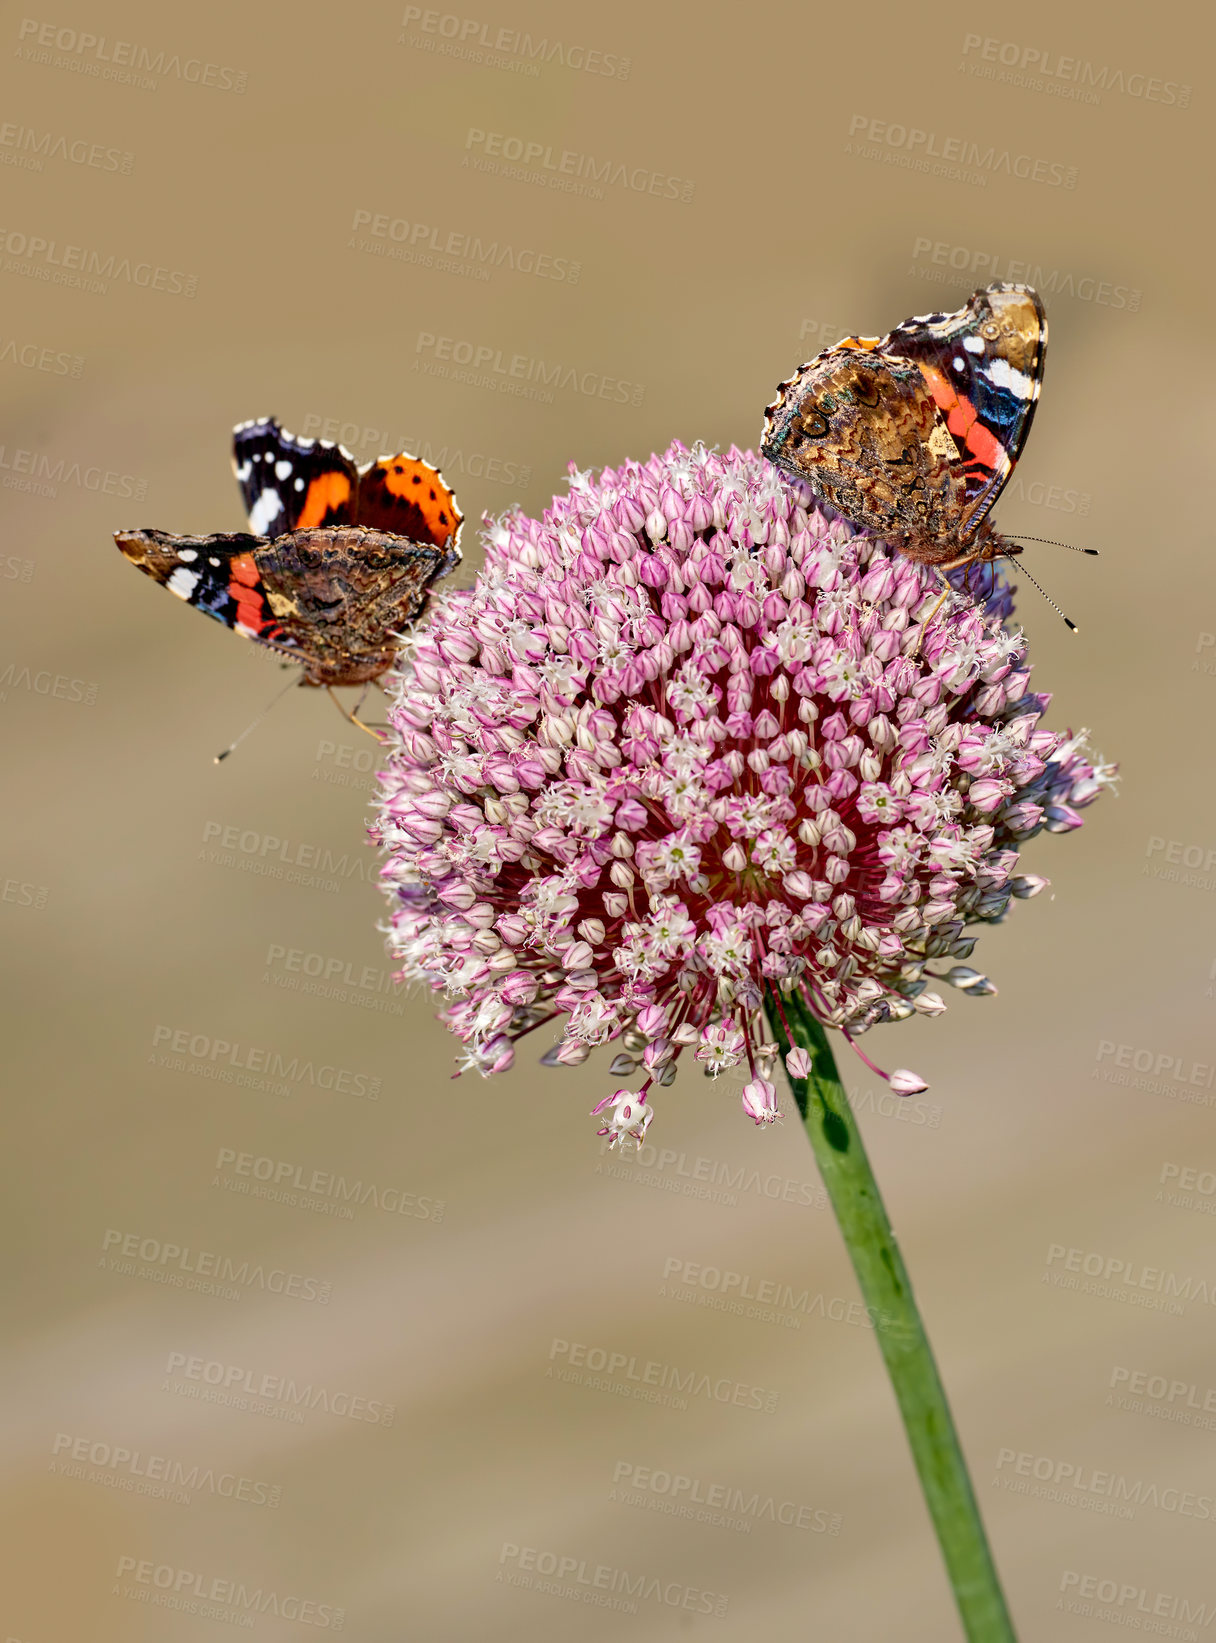 Buy stock photo The Red Admiral or Vanessa atalanta butterfly pollinating a flower. Closeup of two butterflies sitting on a plant outside in a garden. Colorful and bright insect during summer feeding on a flower. 